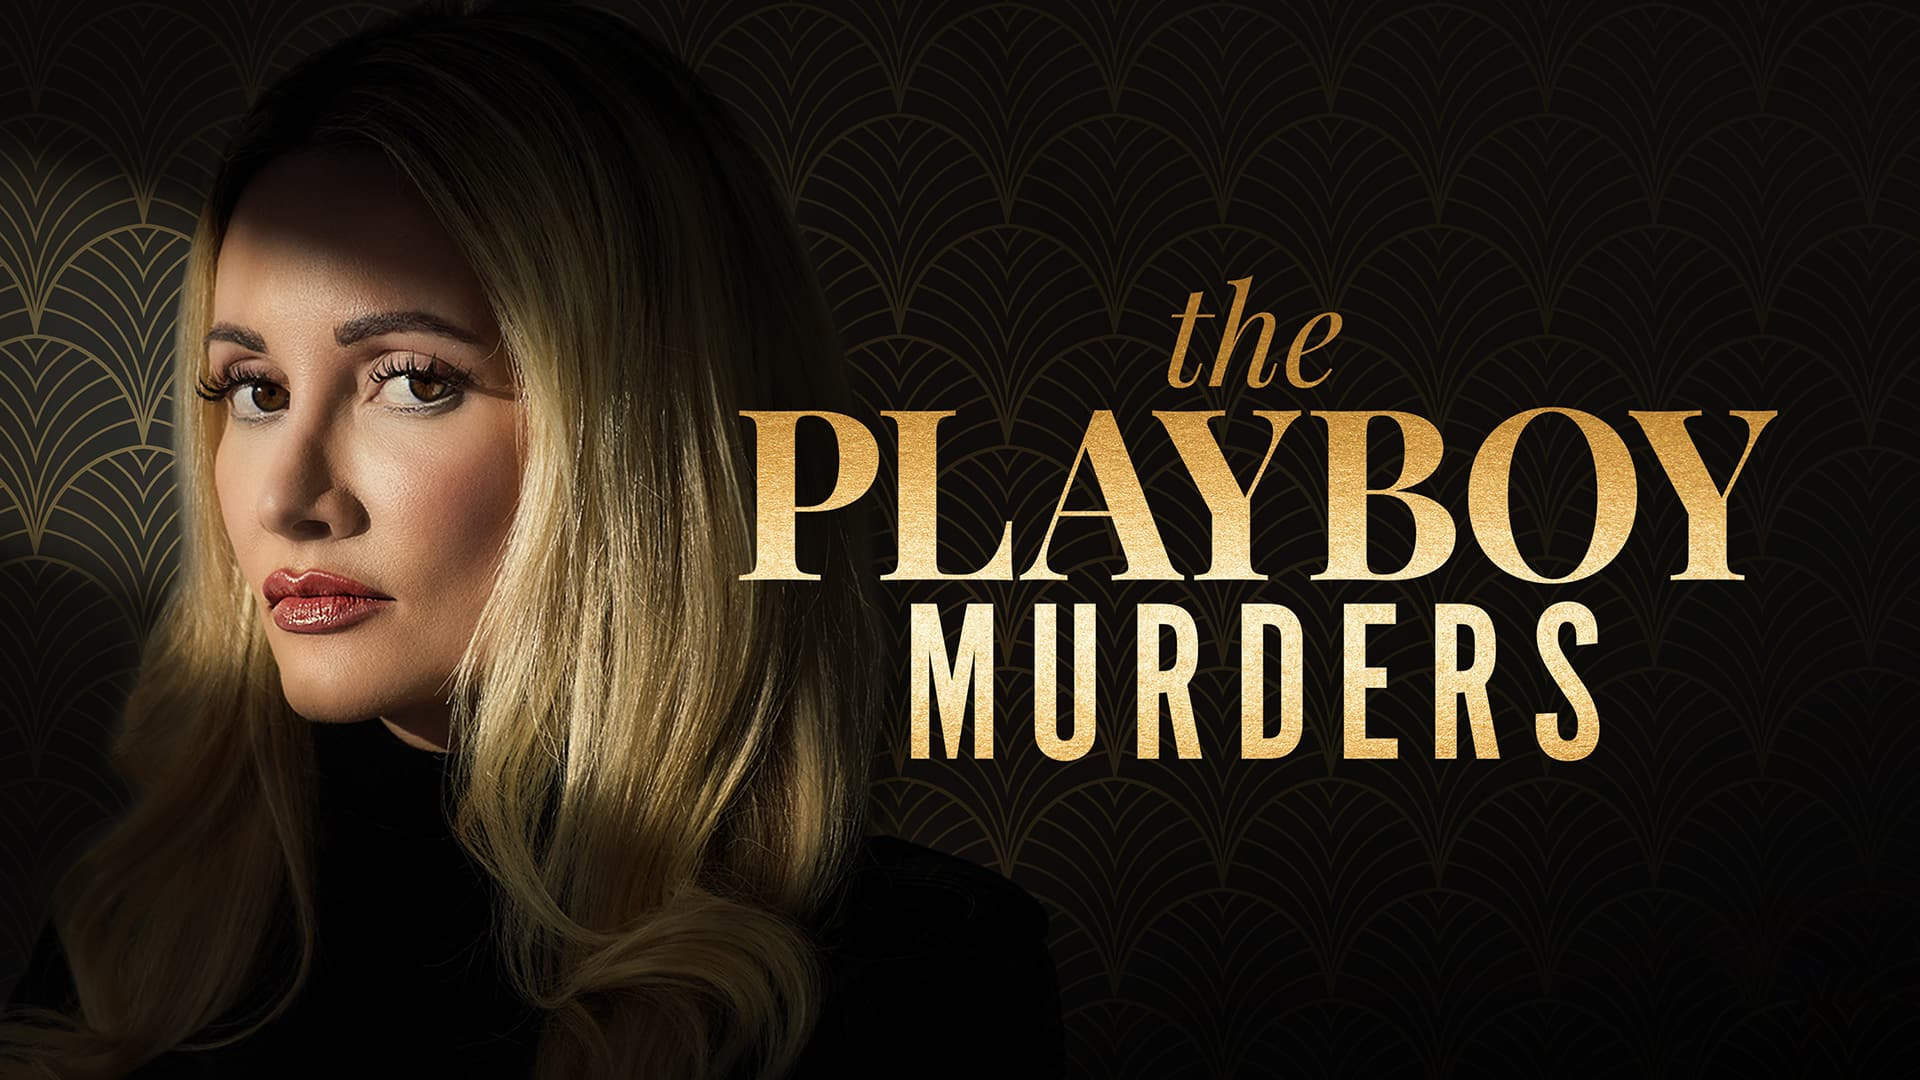 Show The Playboy Murders